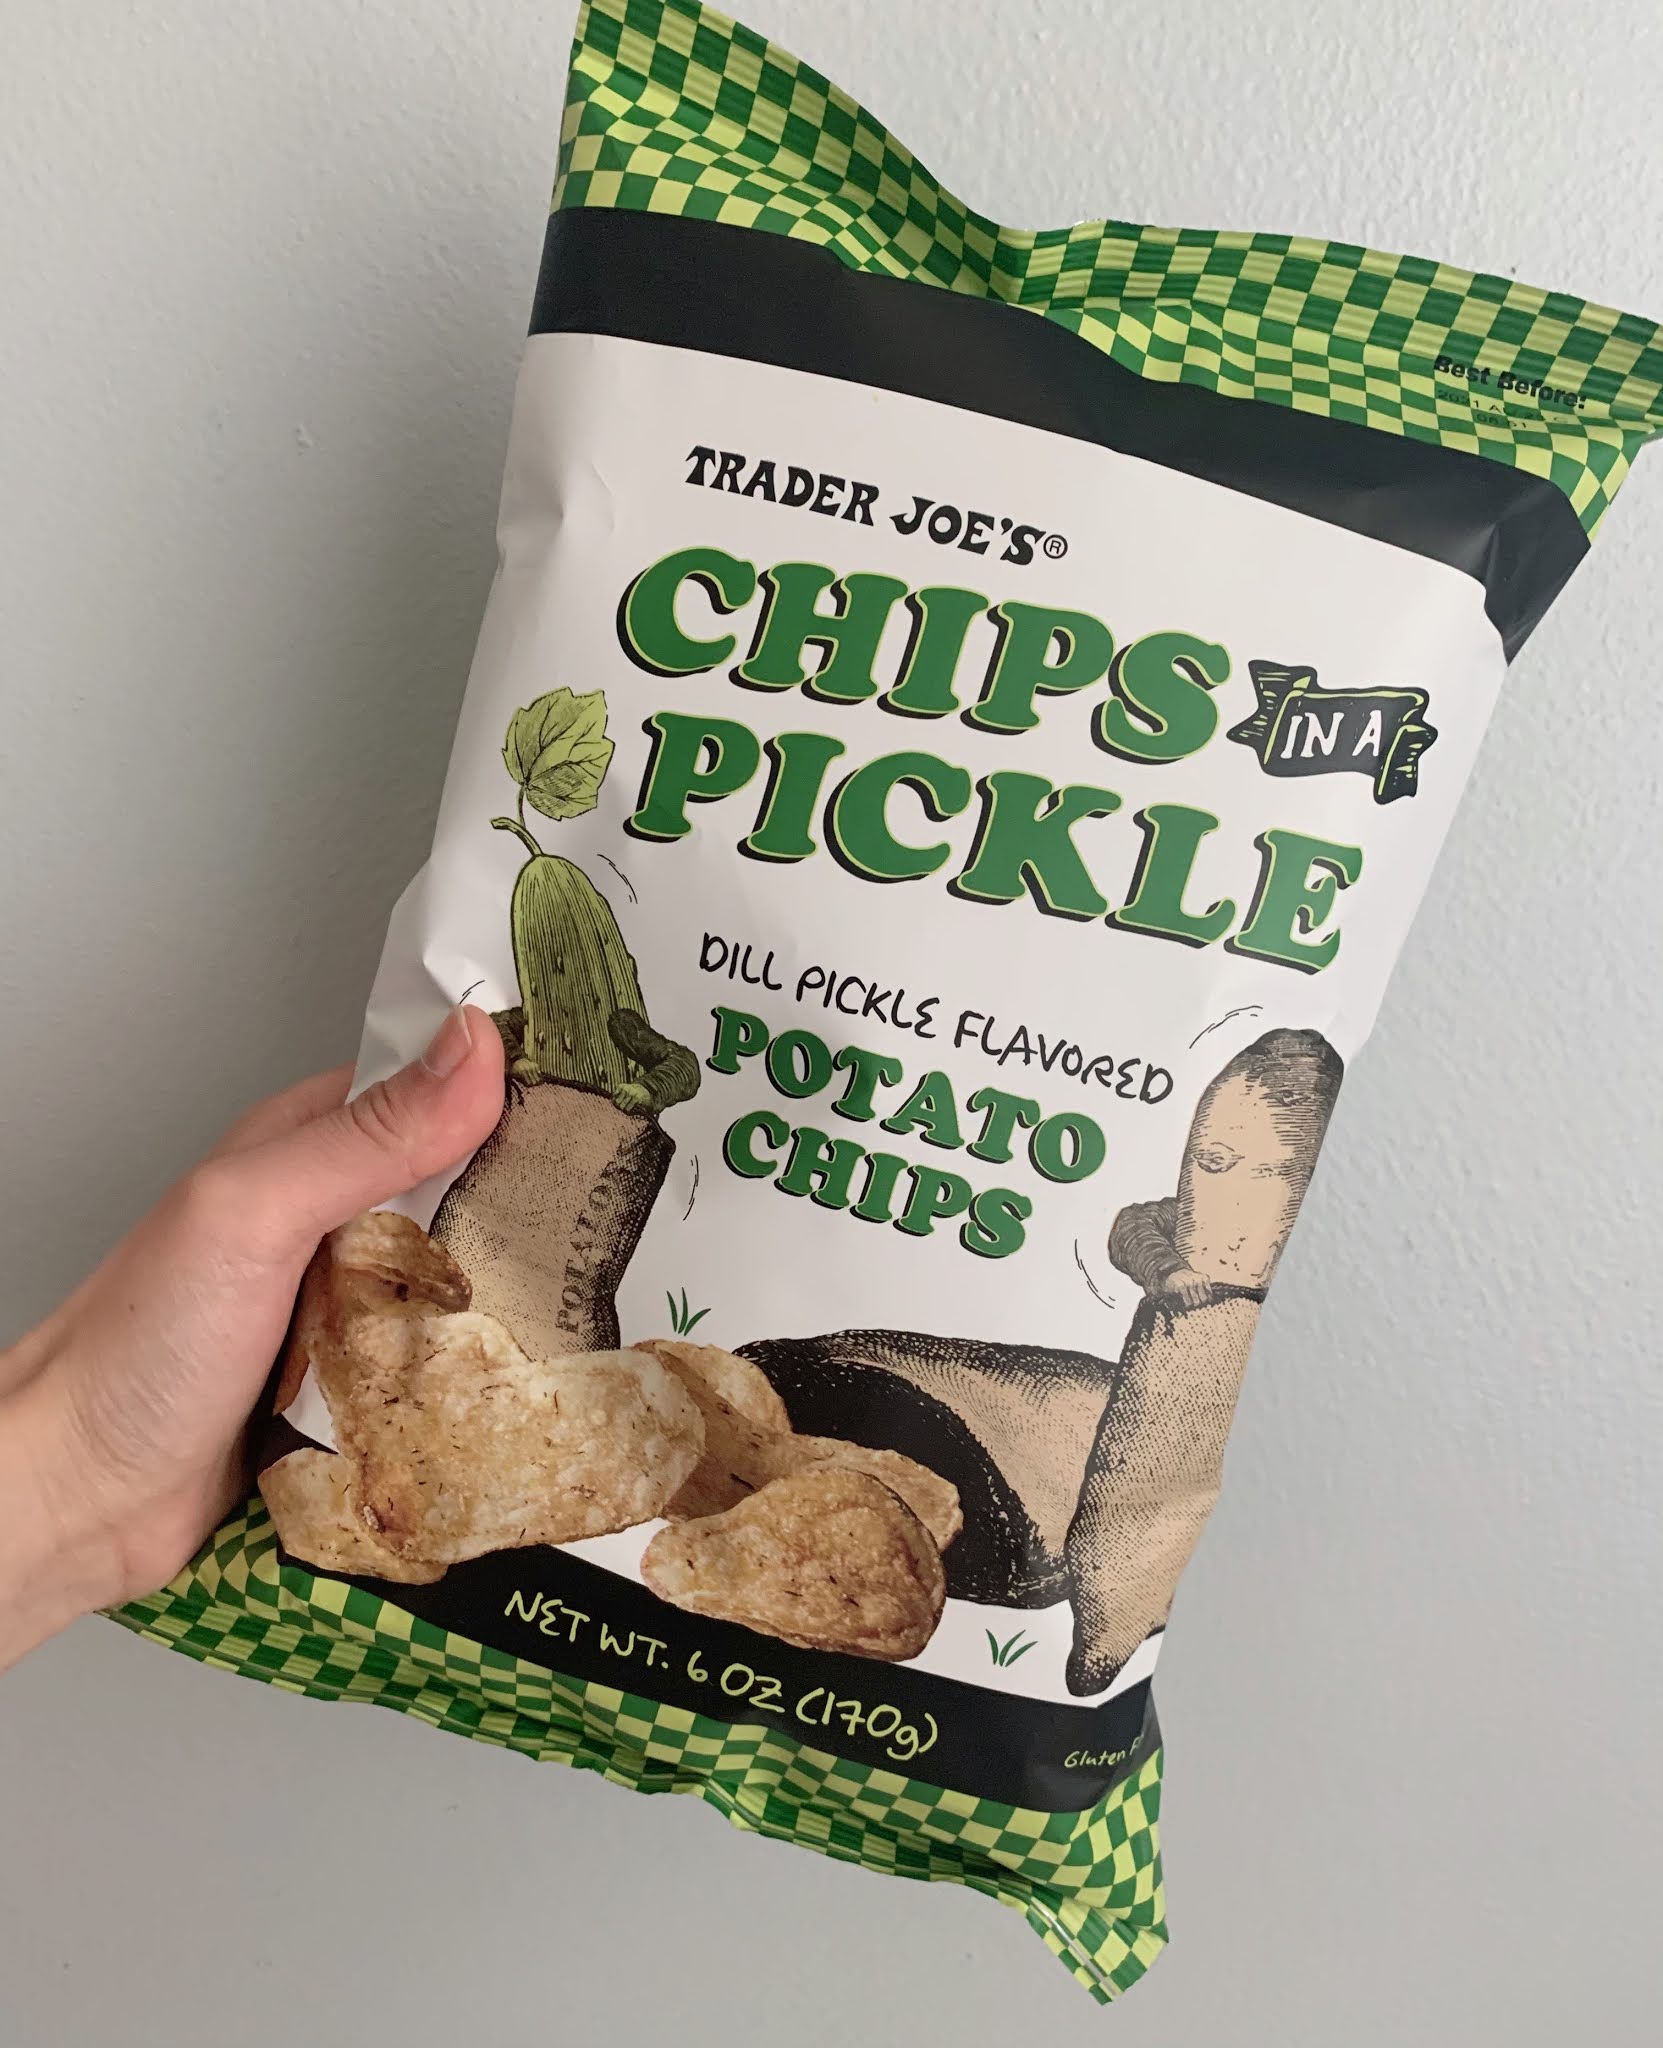 Trader Joe's Has a New Pickle Seasoning For a Limited Time Only